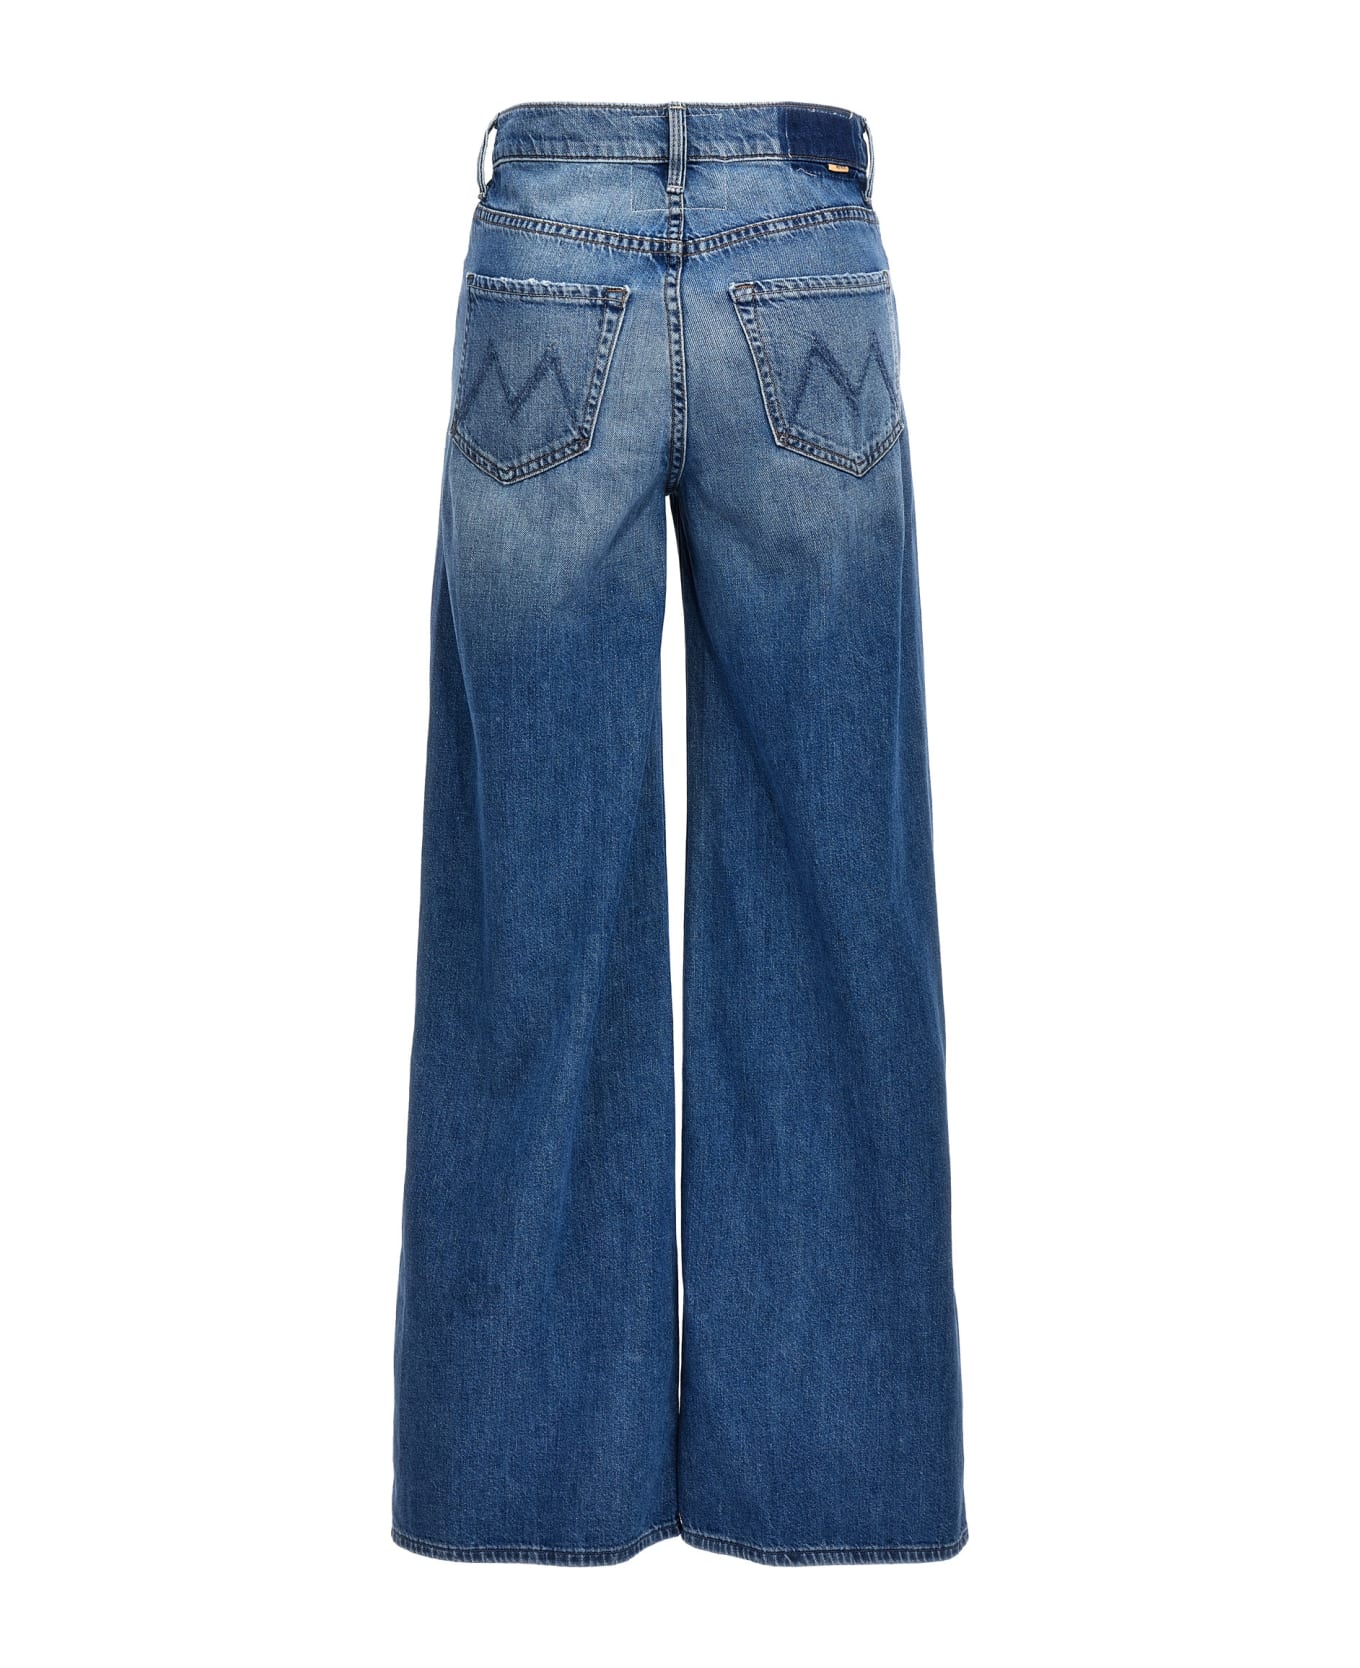 Mother 'the Ditcher Roller Sneak' Jeans - Blue デニム